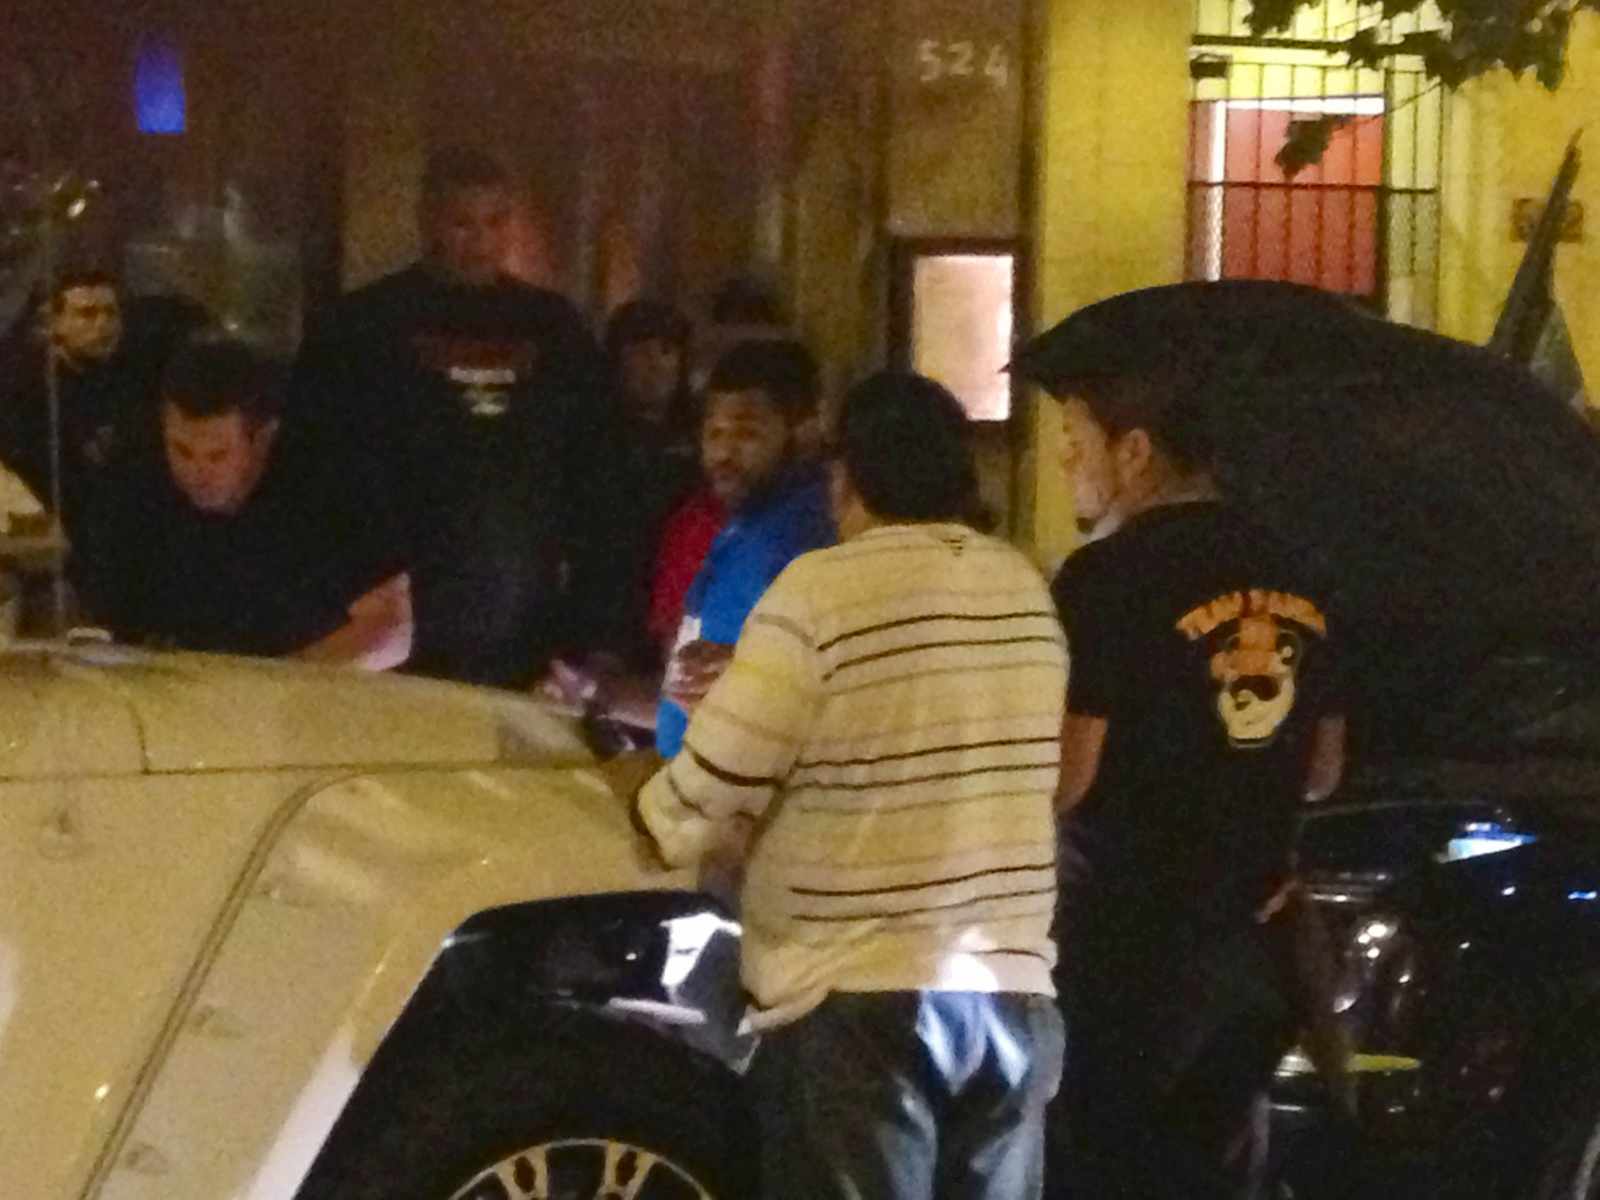 Pablo Sandoval's Sports Car Gets Benched on Valencia | Uptown Almanac